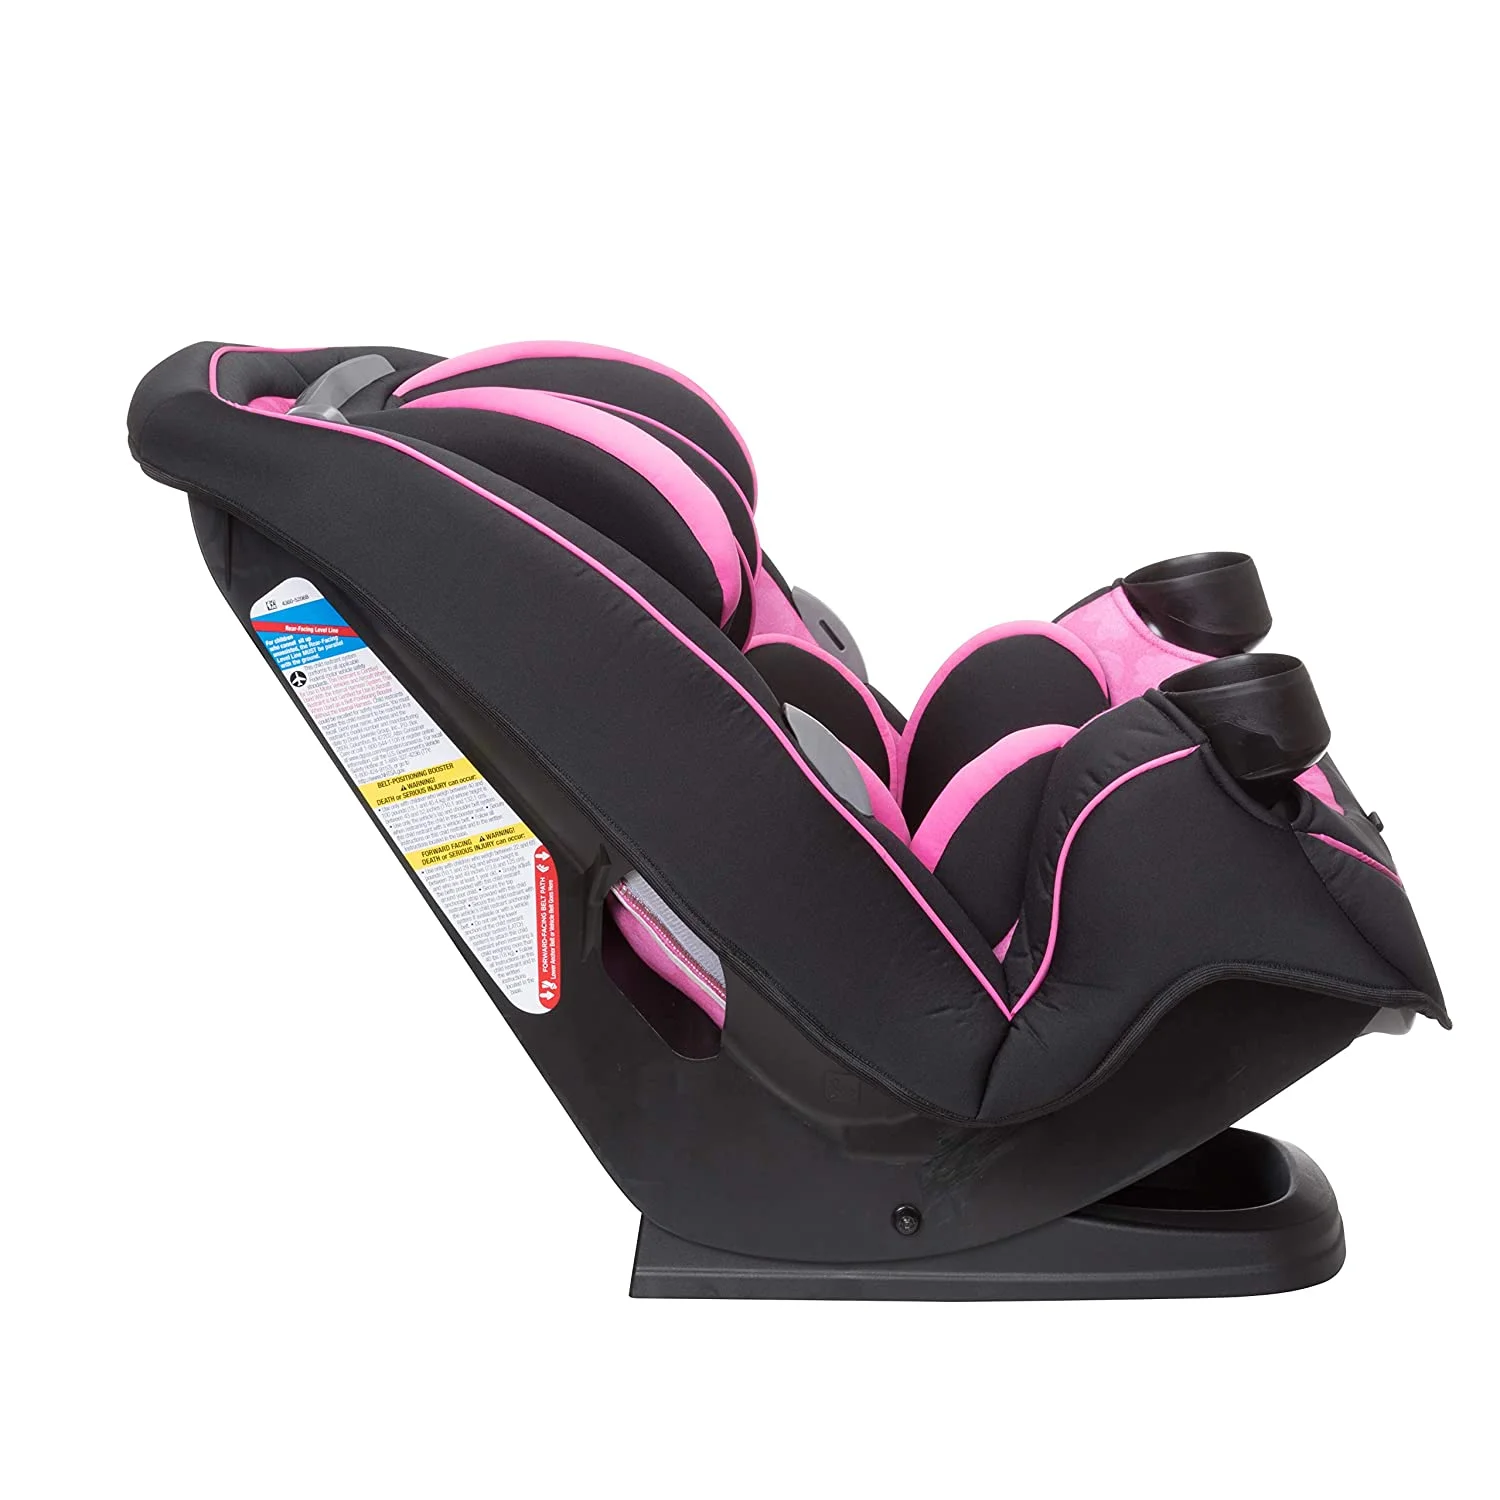 Best Forward Facing Car Seats For 2 Years Old Kids